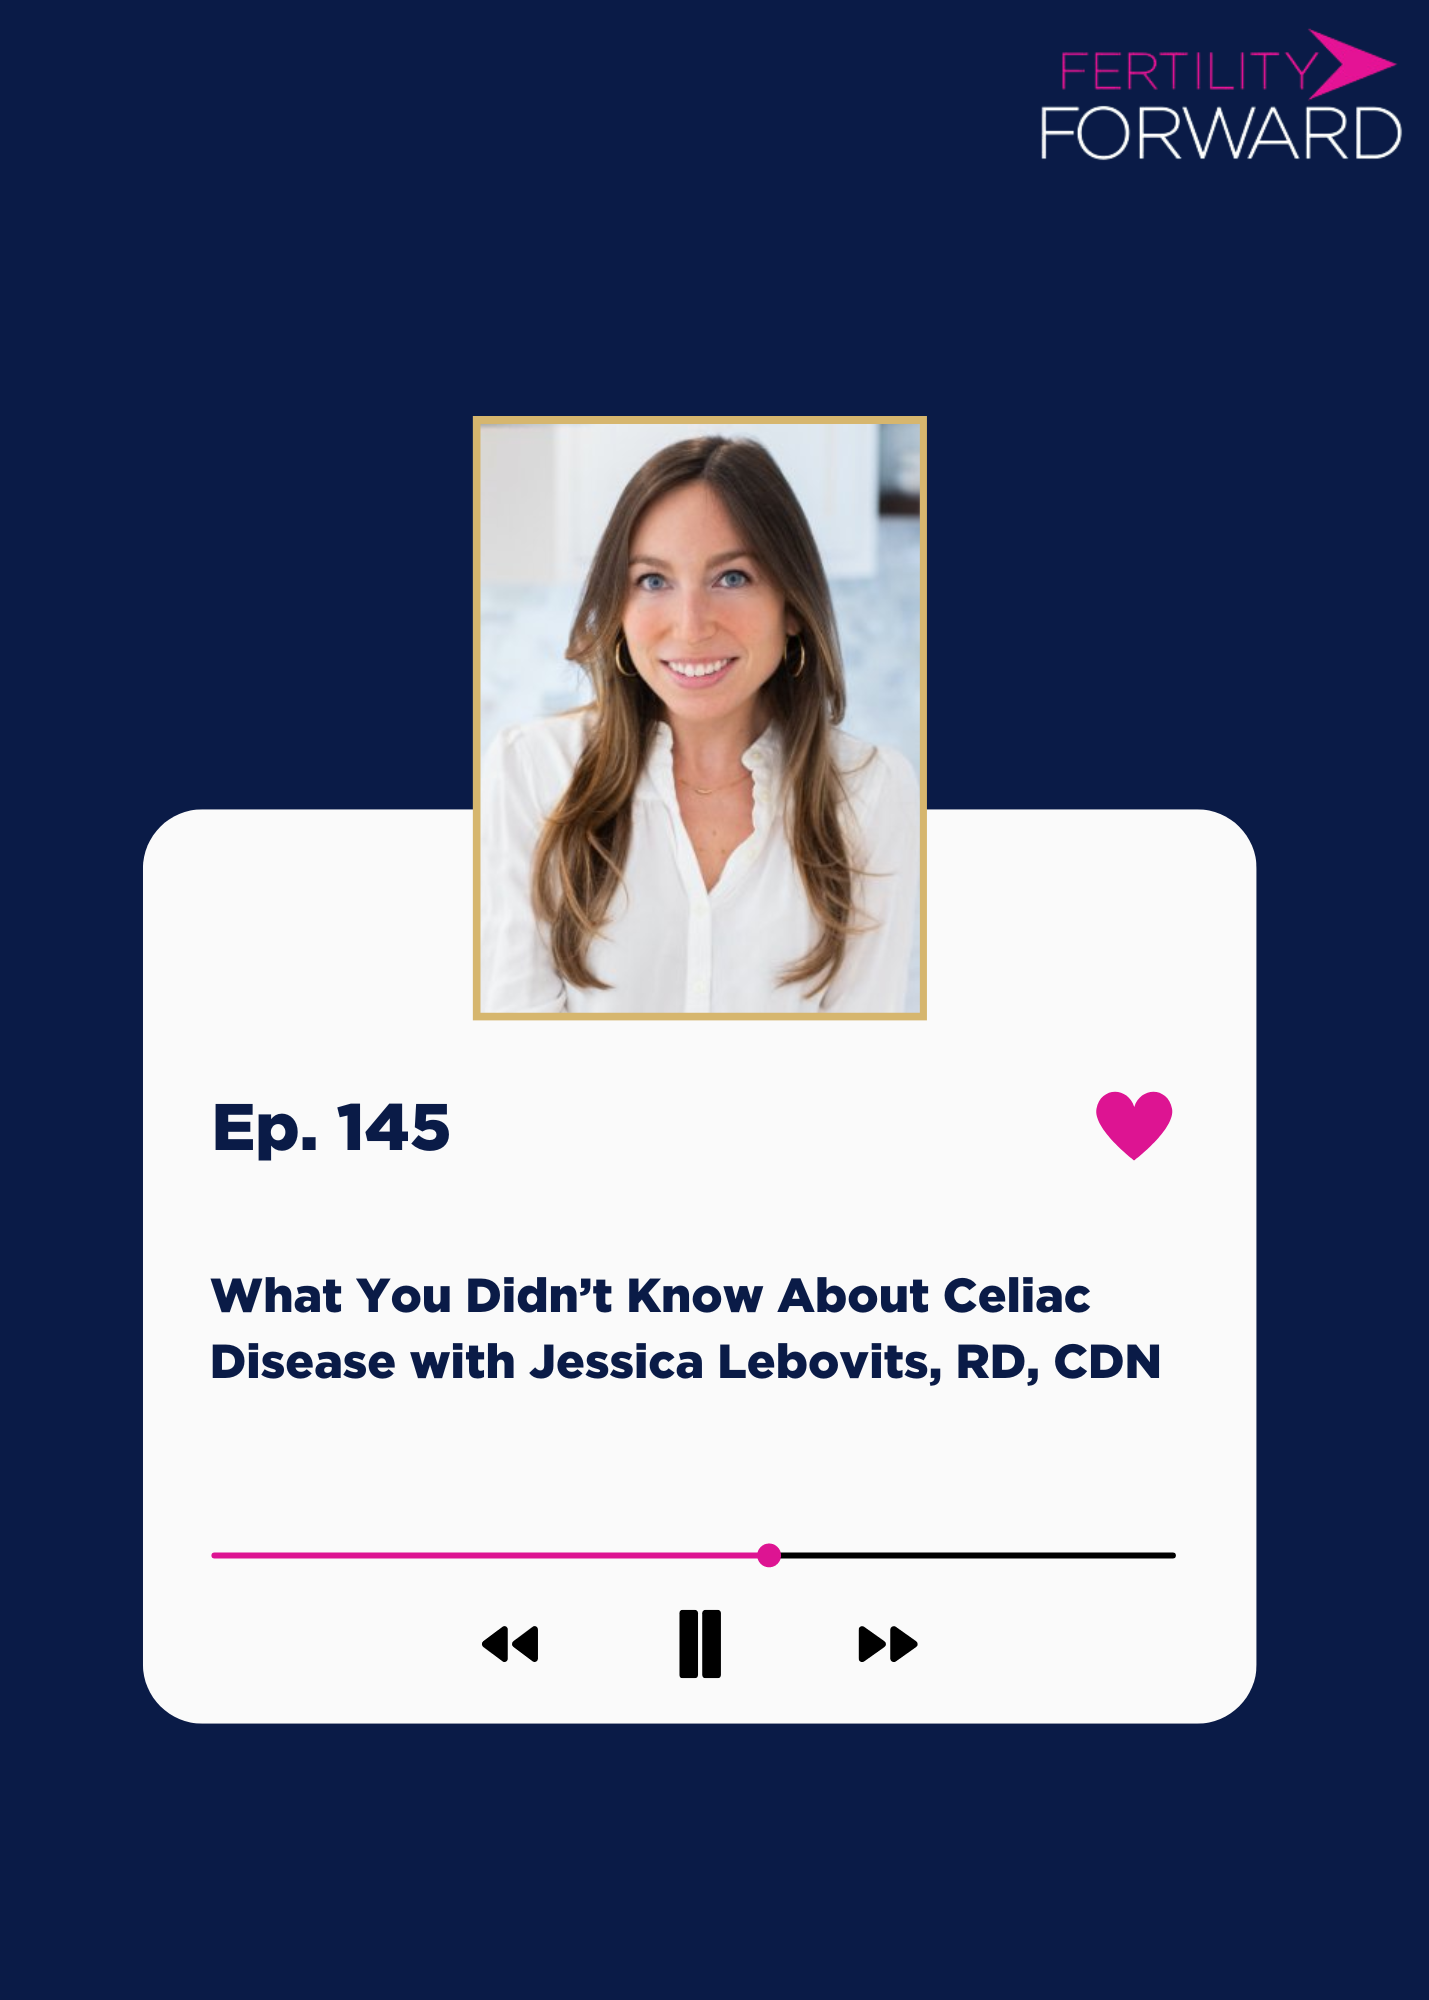 Ep 145: What You Didn’t Know About Celiac Disease with Jessica Lebovits, RD, CDN